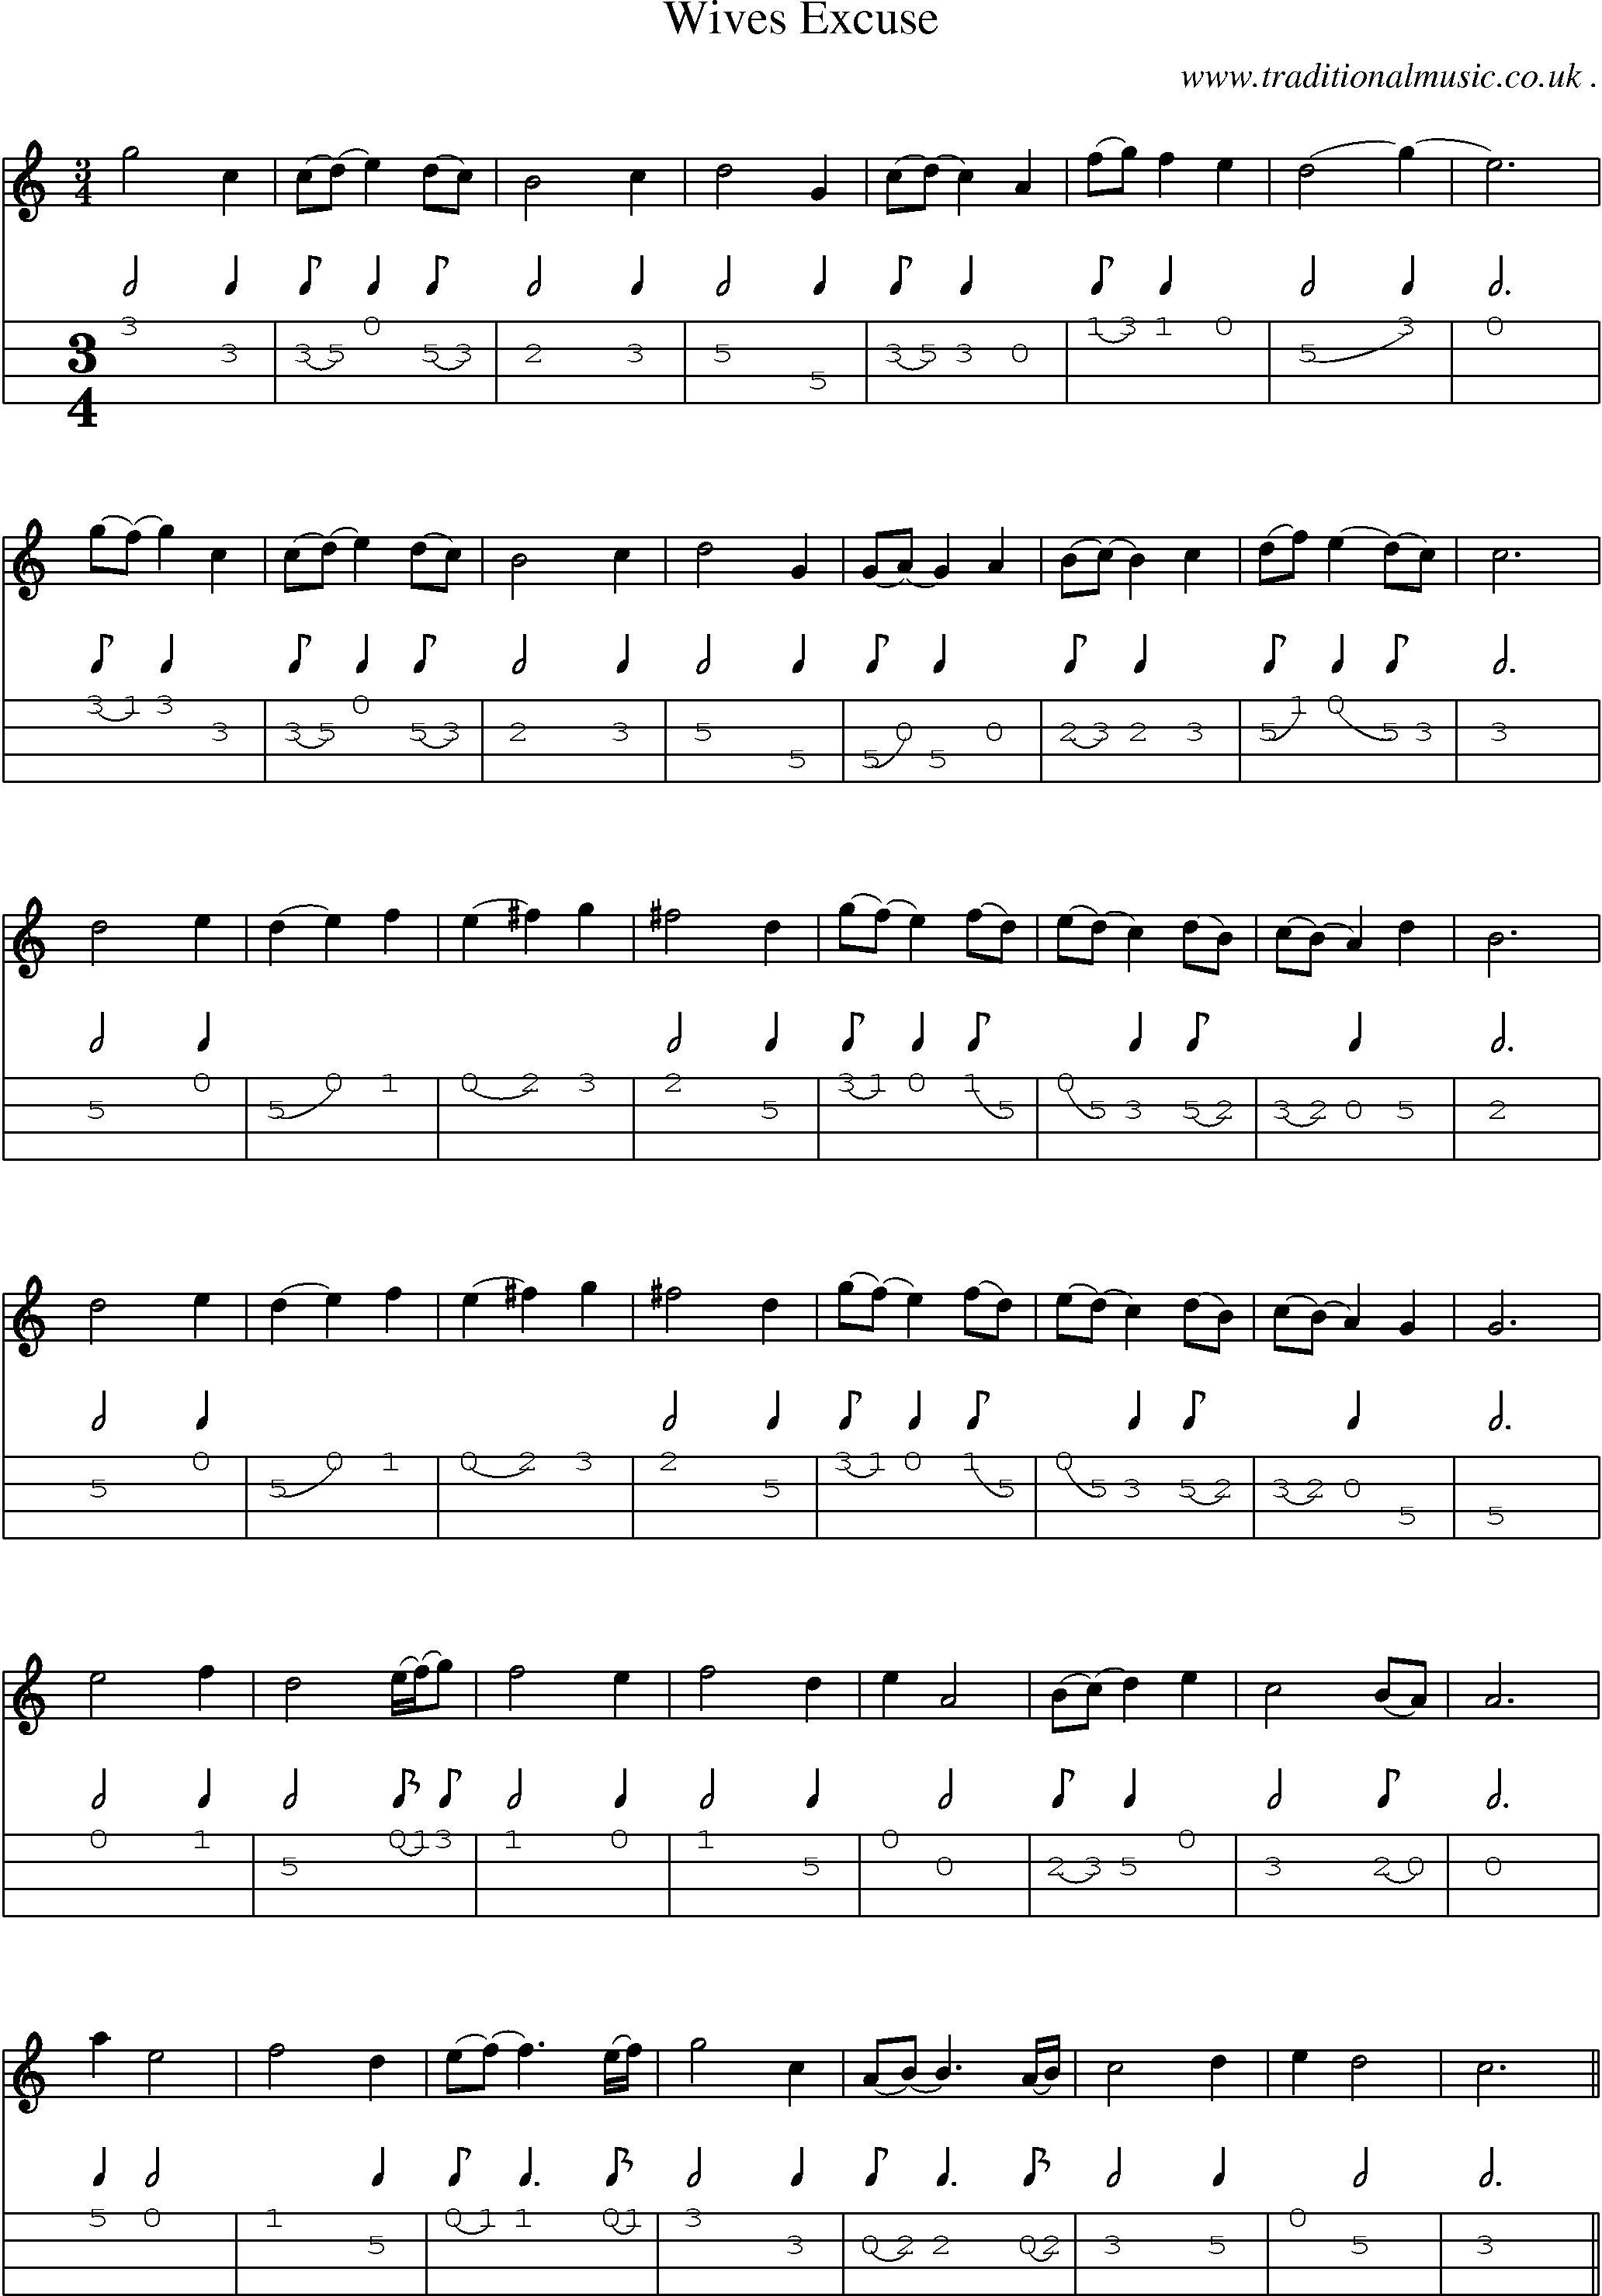 Sheet-Music and Mandolin Tabs for Wives Excuse